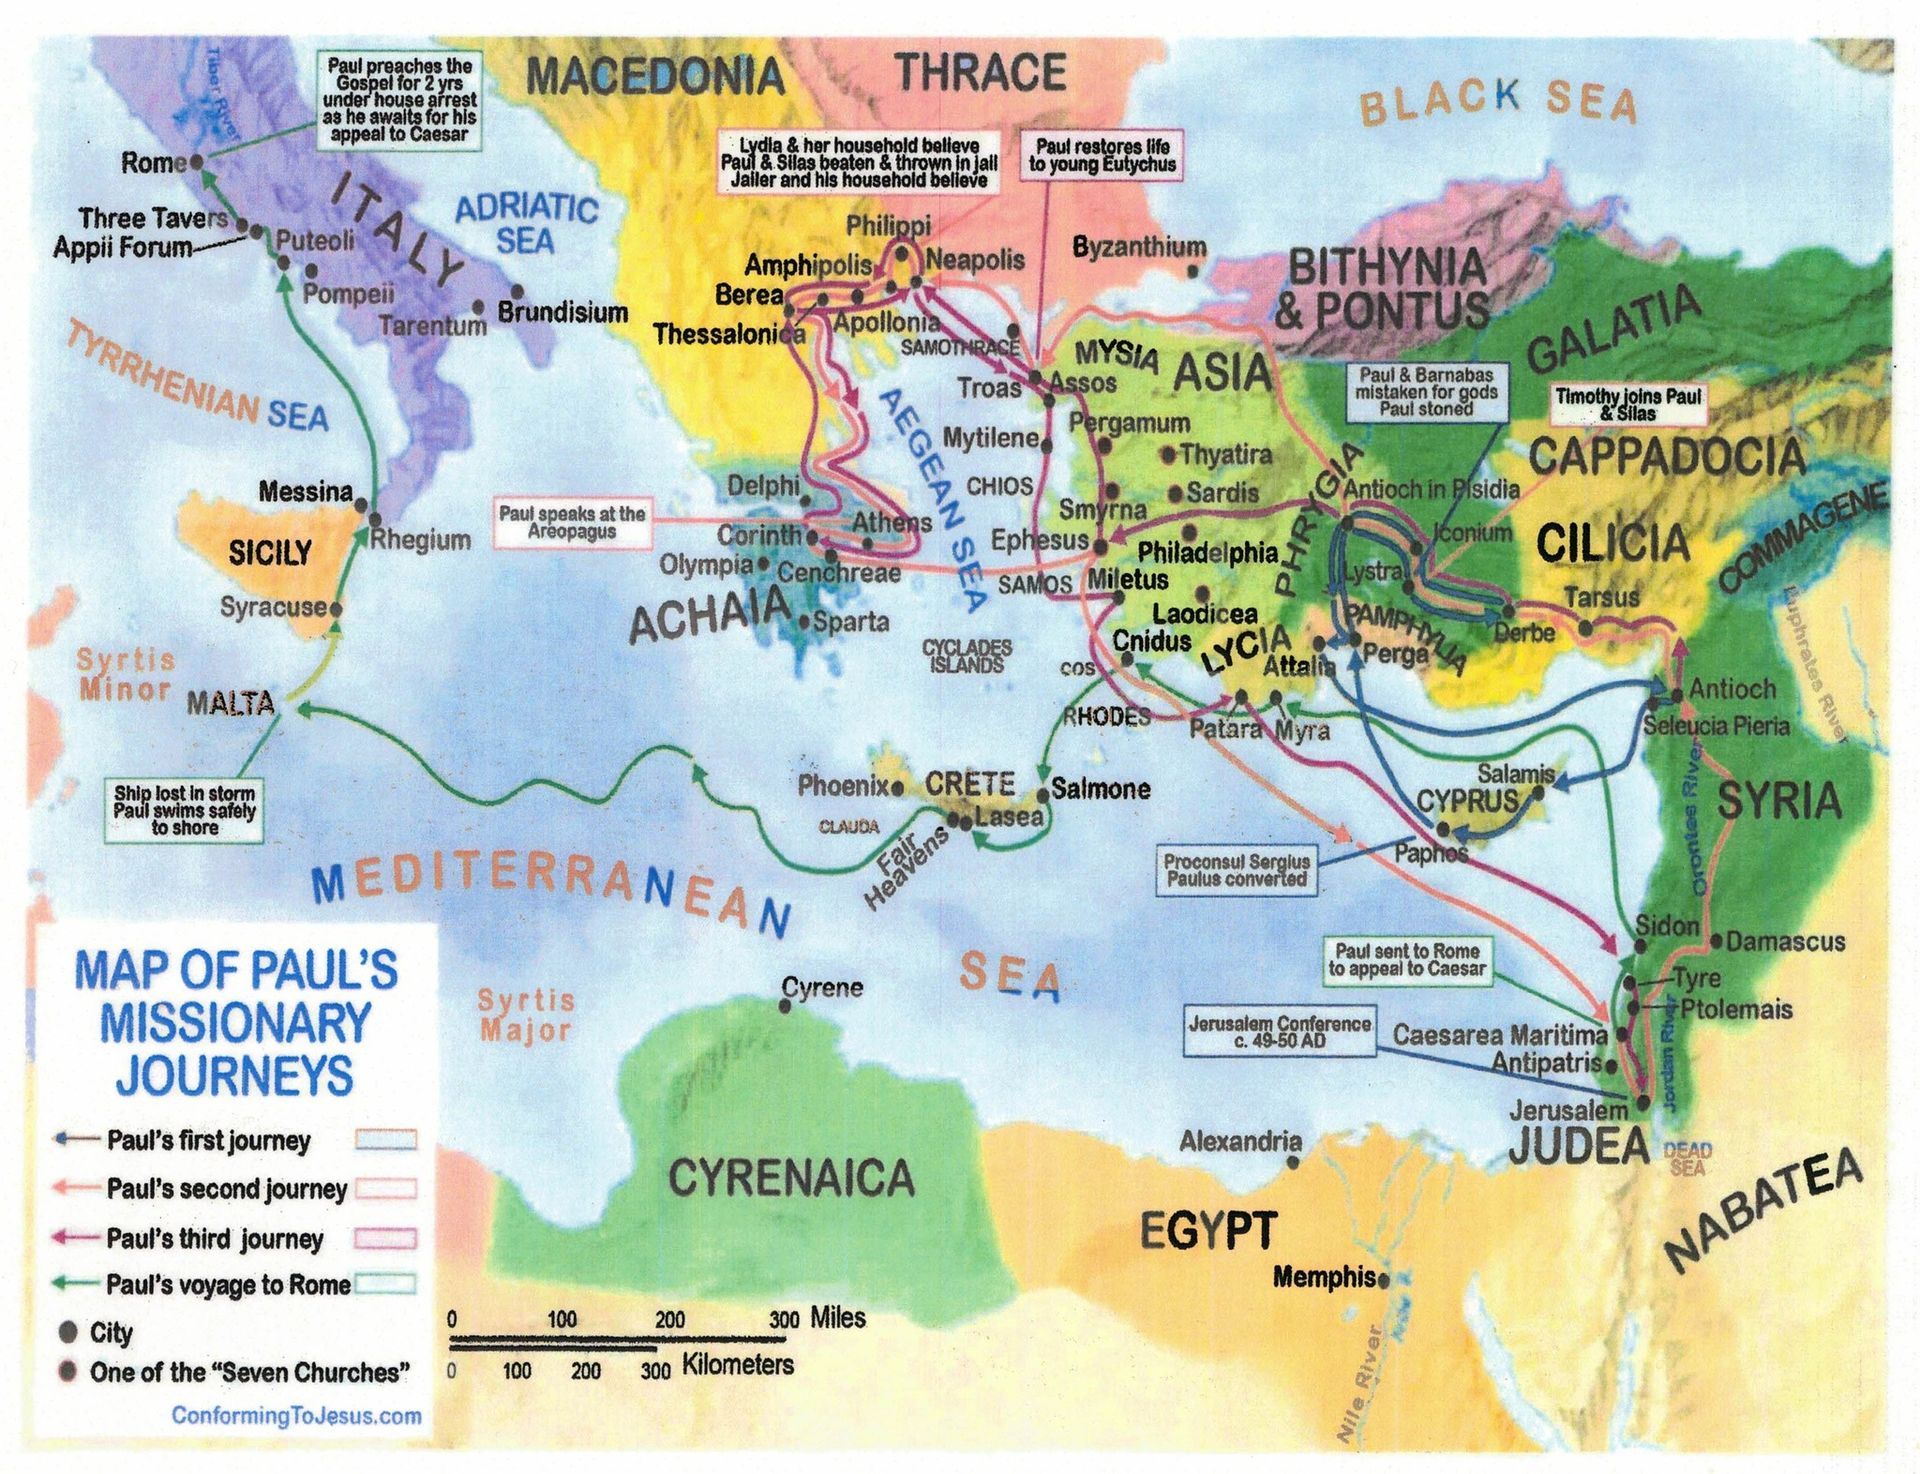 A map of paul 's missionary journeys is shown